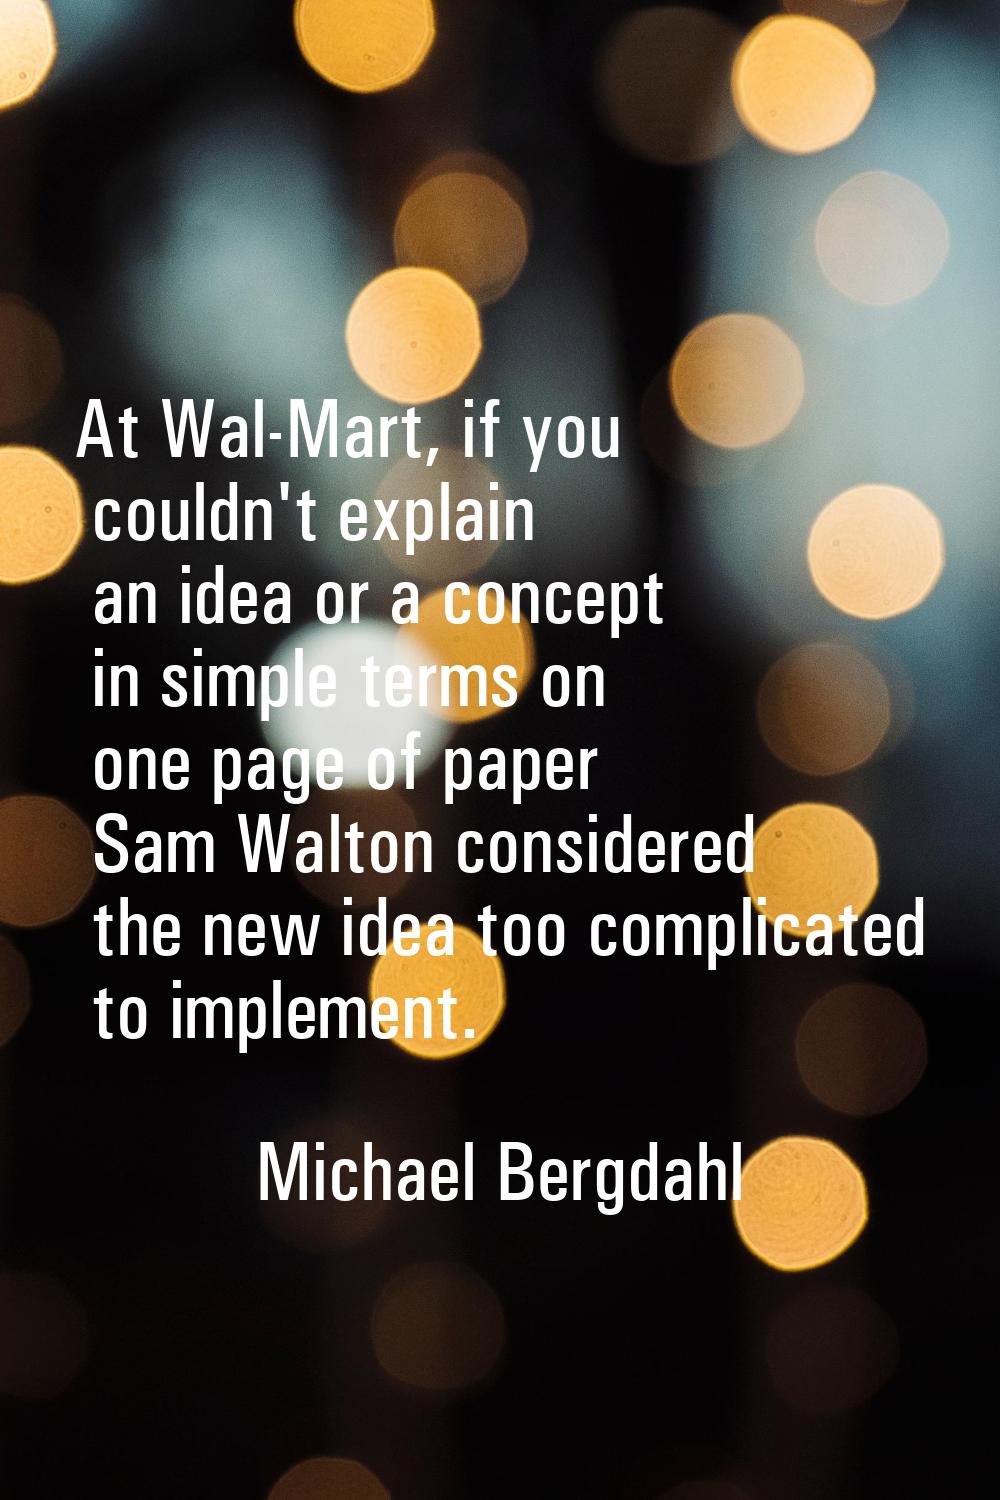 At Wal-Mart, if you couldn't explain an idea or a concept in simple terms on one page of paper Sam 